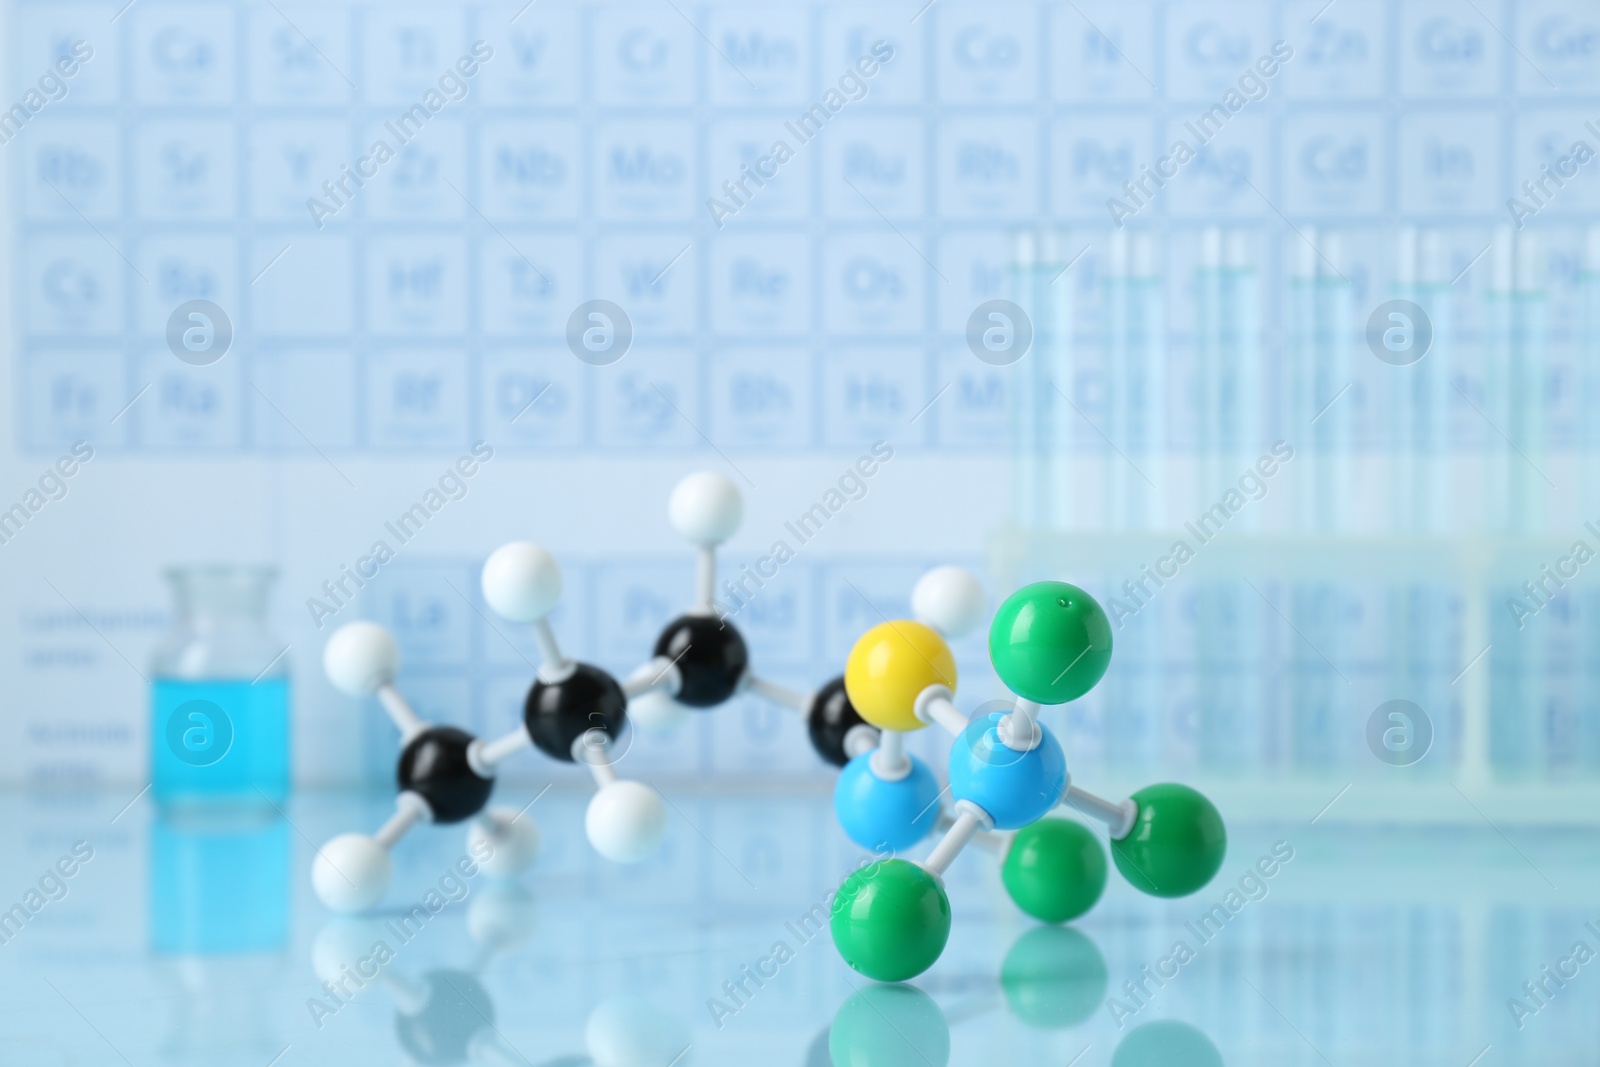 Photo of Molecular model on light surface against blurred background